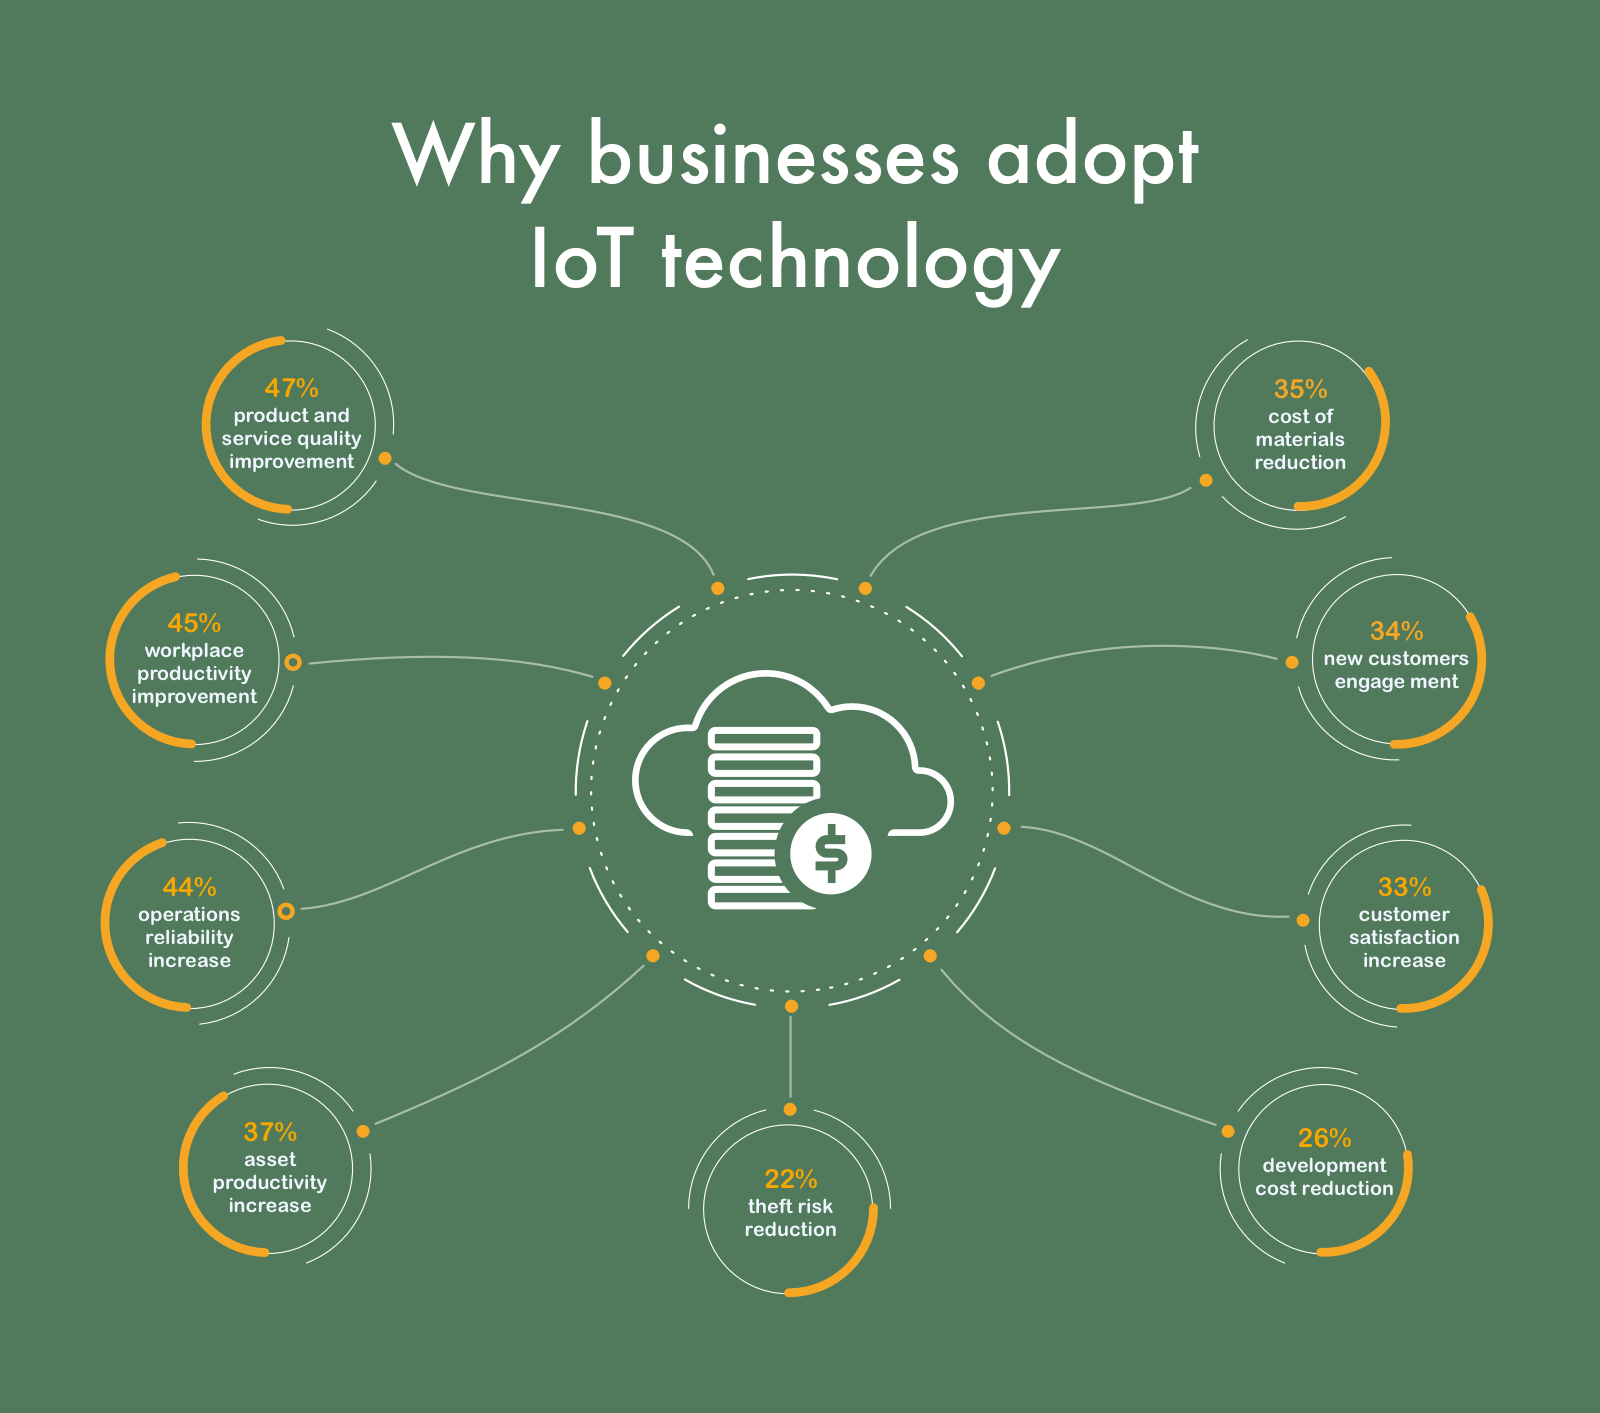 Why businesses adopt IoT technology